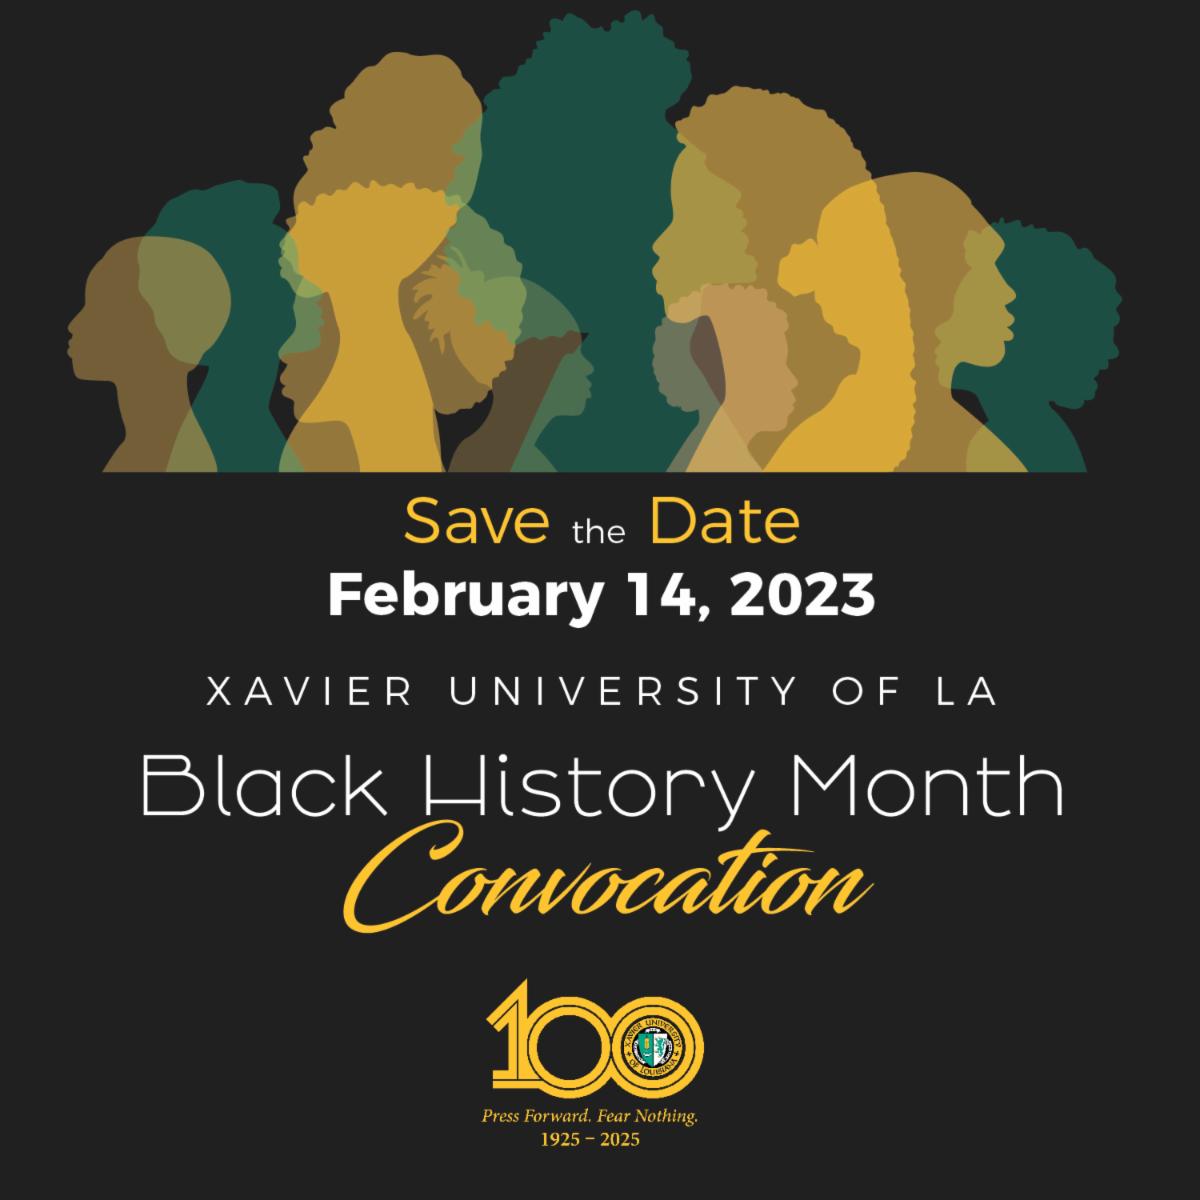 Black History Month Convocation